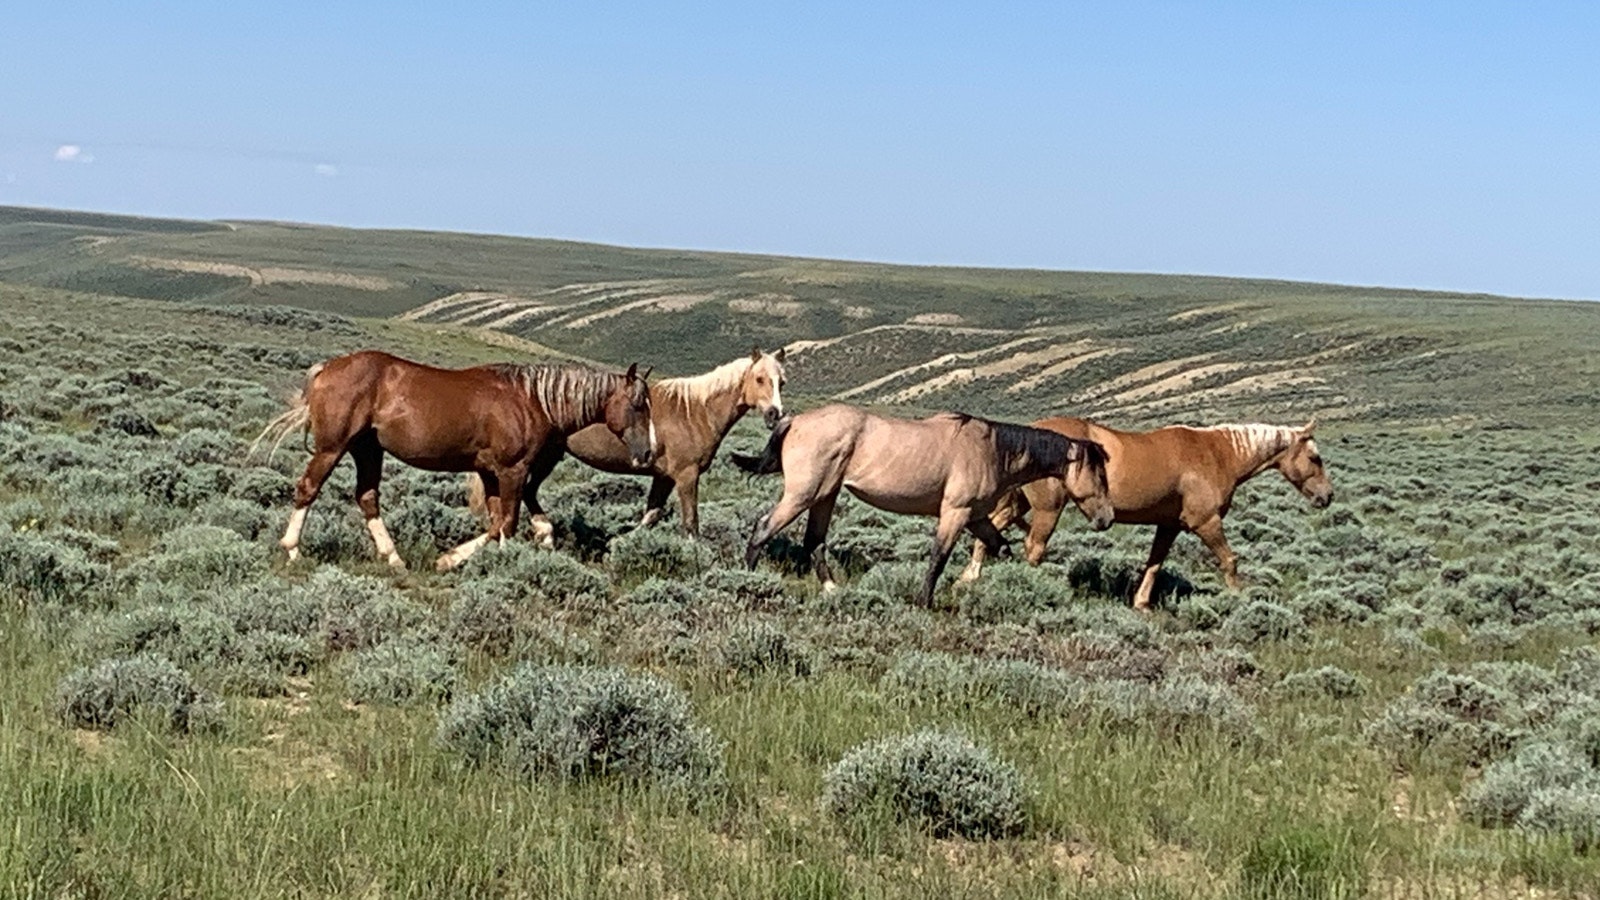 The past winter took a terrible toll on deer, antelope, mustangs and other animals in the Red Desert. However a wet spring brought ample forage, and the surviving critters look to be in good shape.